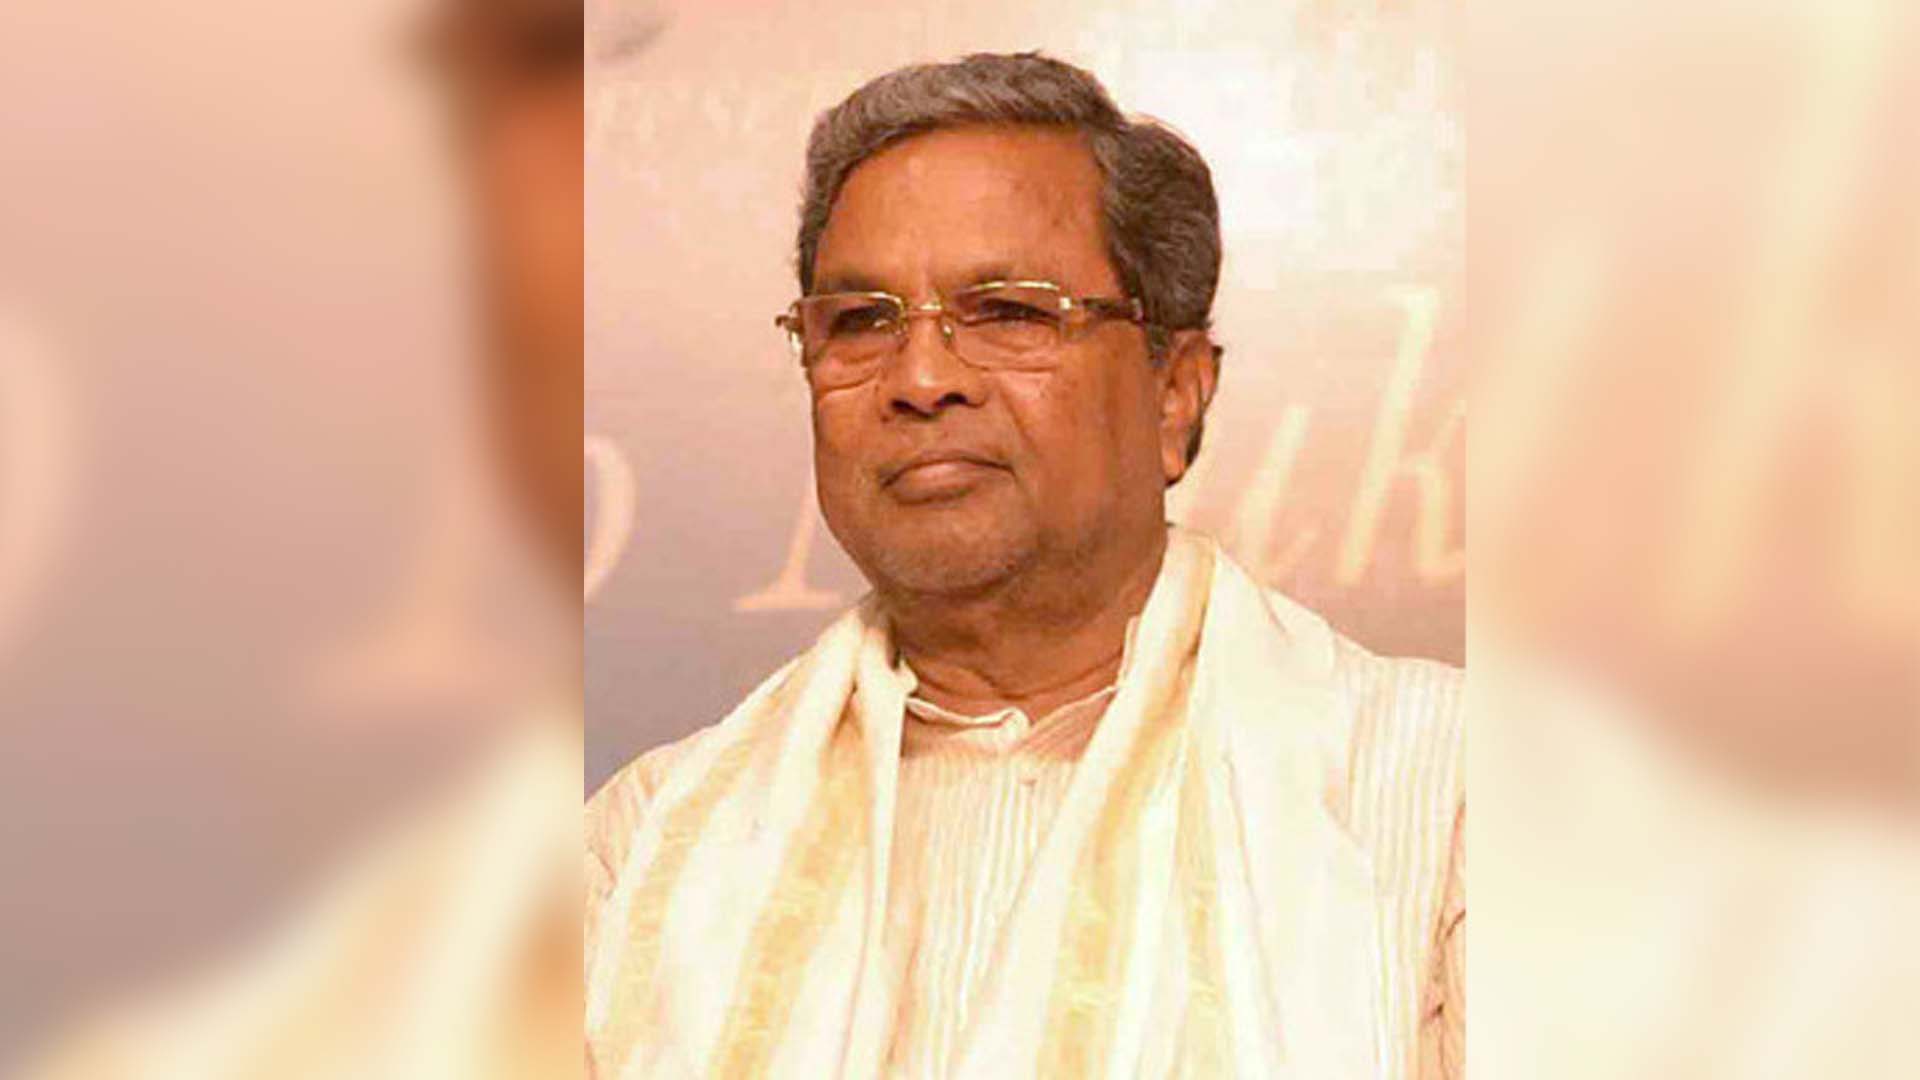 BJP's slogan 400 seats is to divert public attention from their defeat, says Siddaramaiah